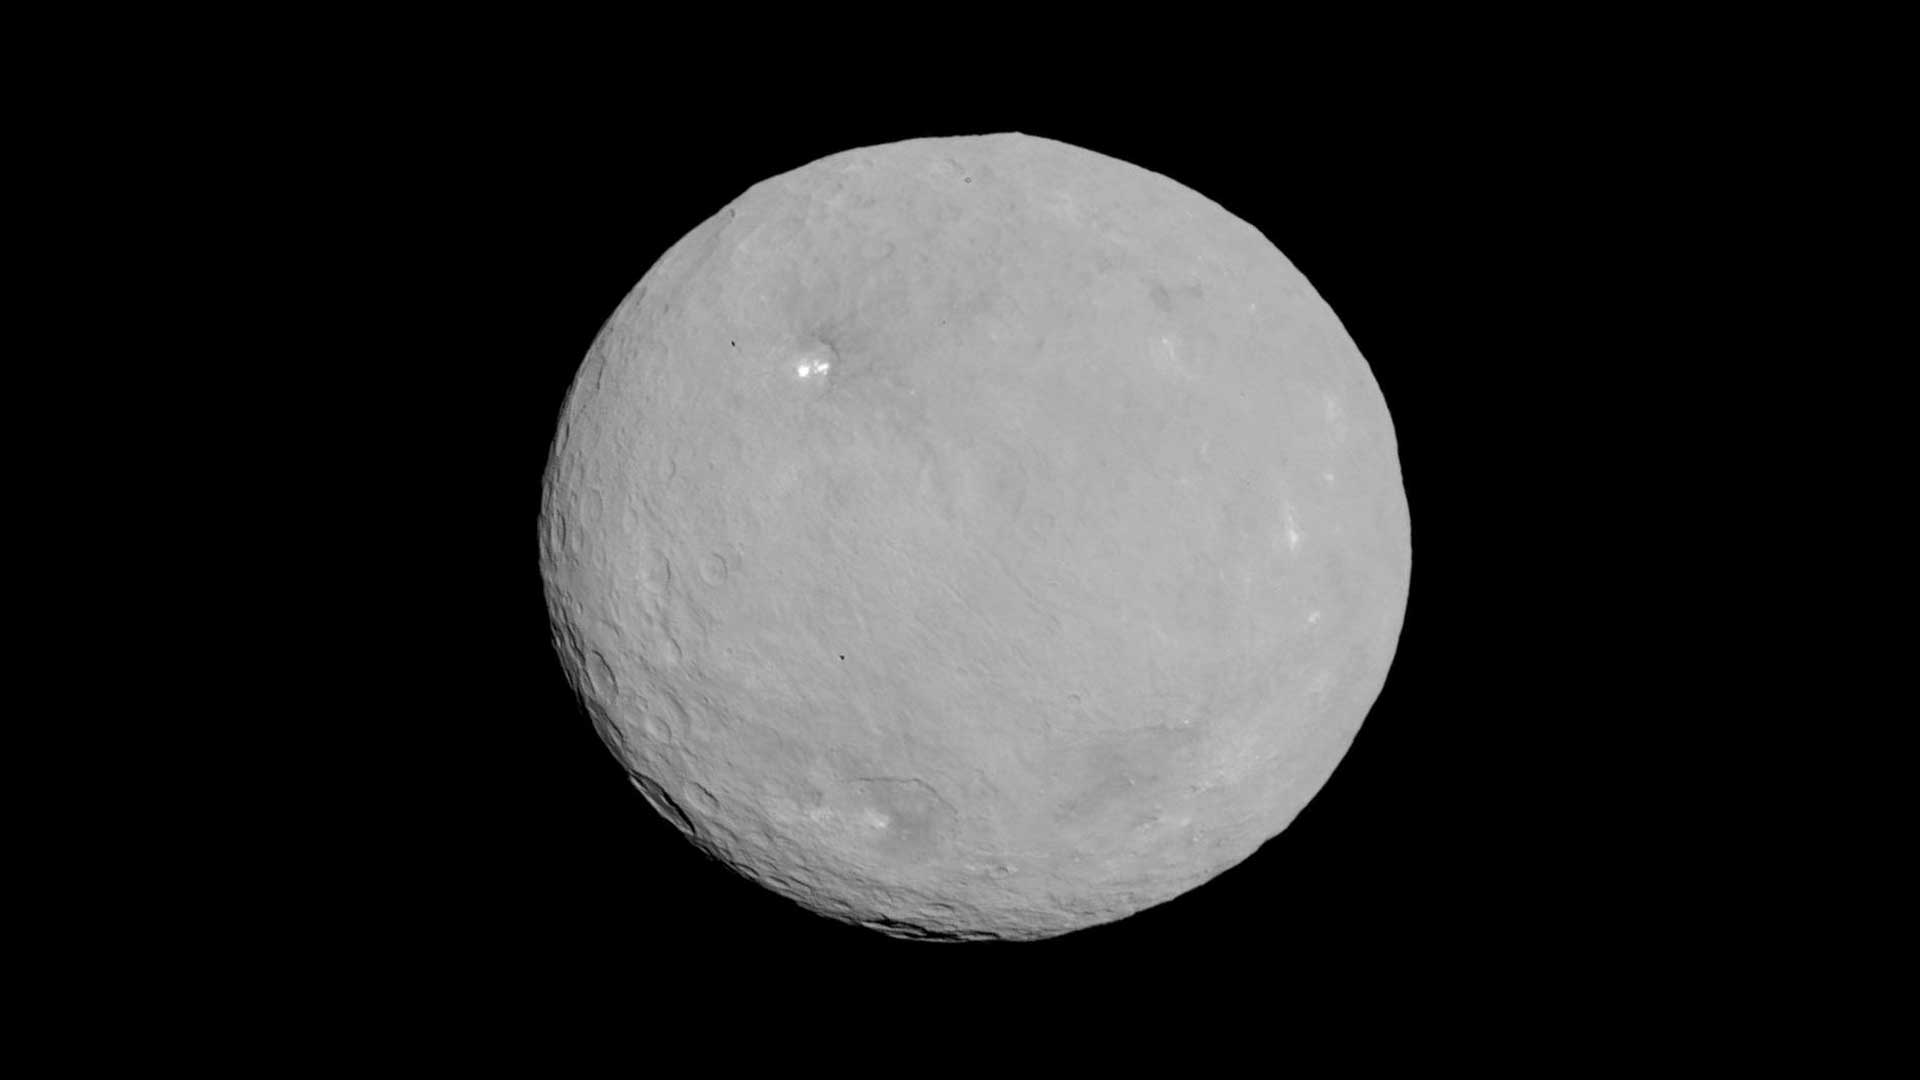 Gray Ceres has a bright spot near its upper left side in this image from NASA's Dawn spacecraft.